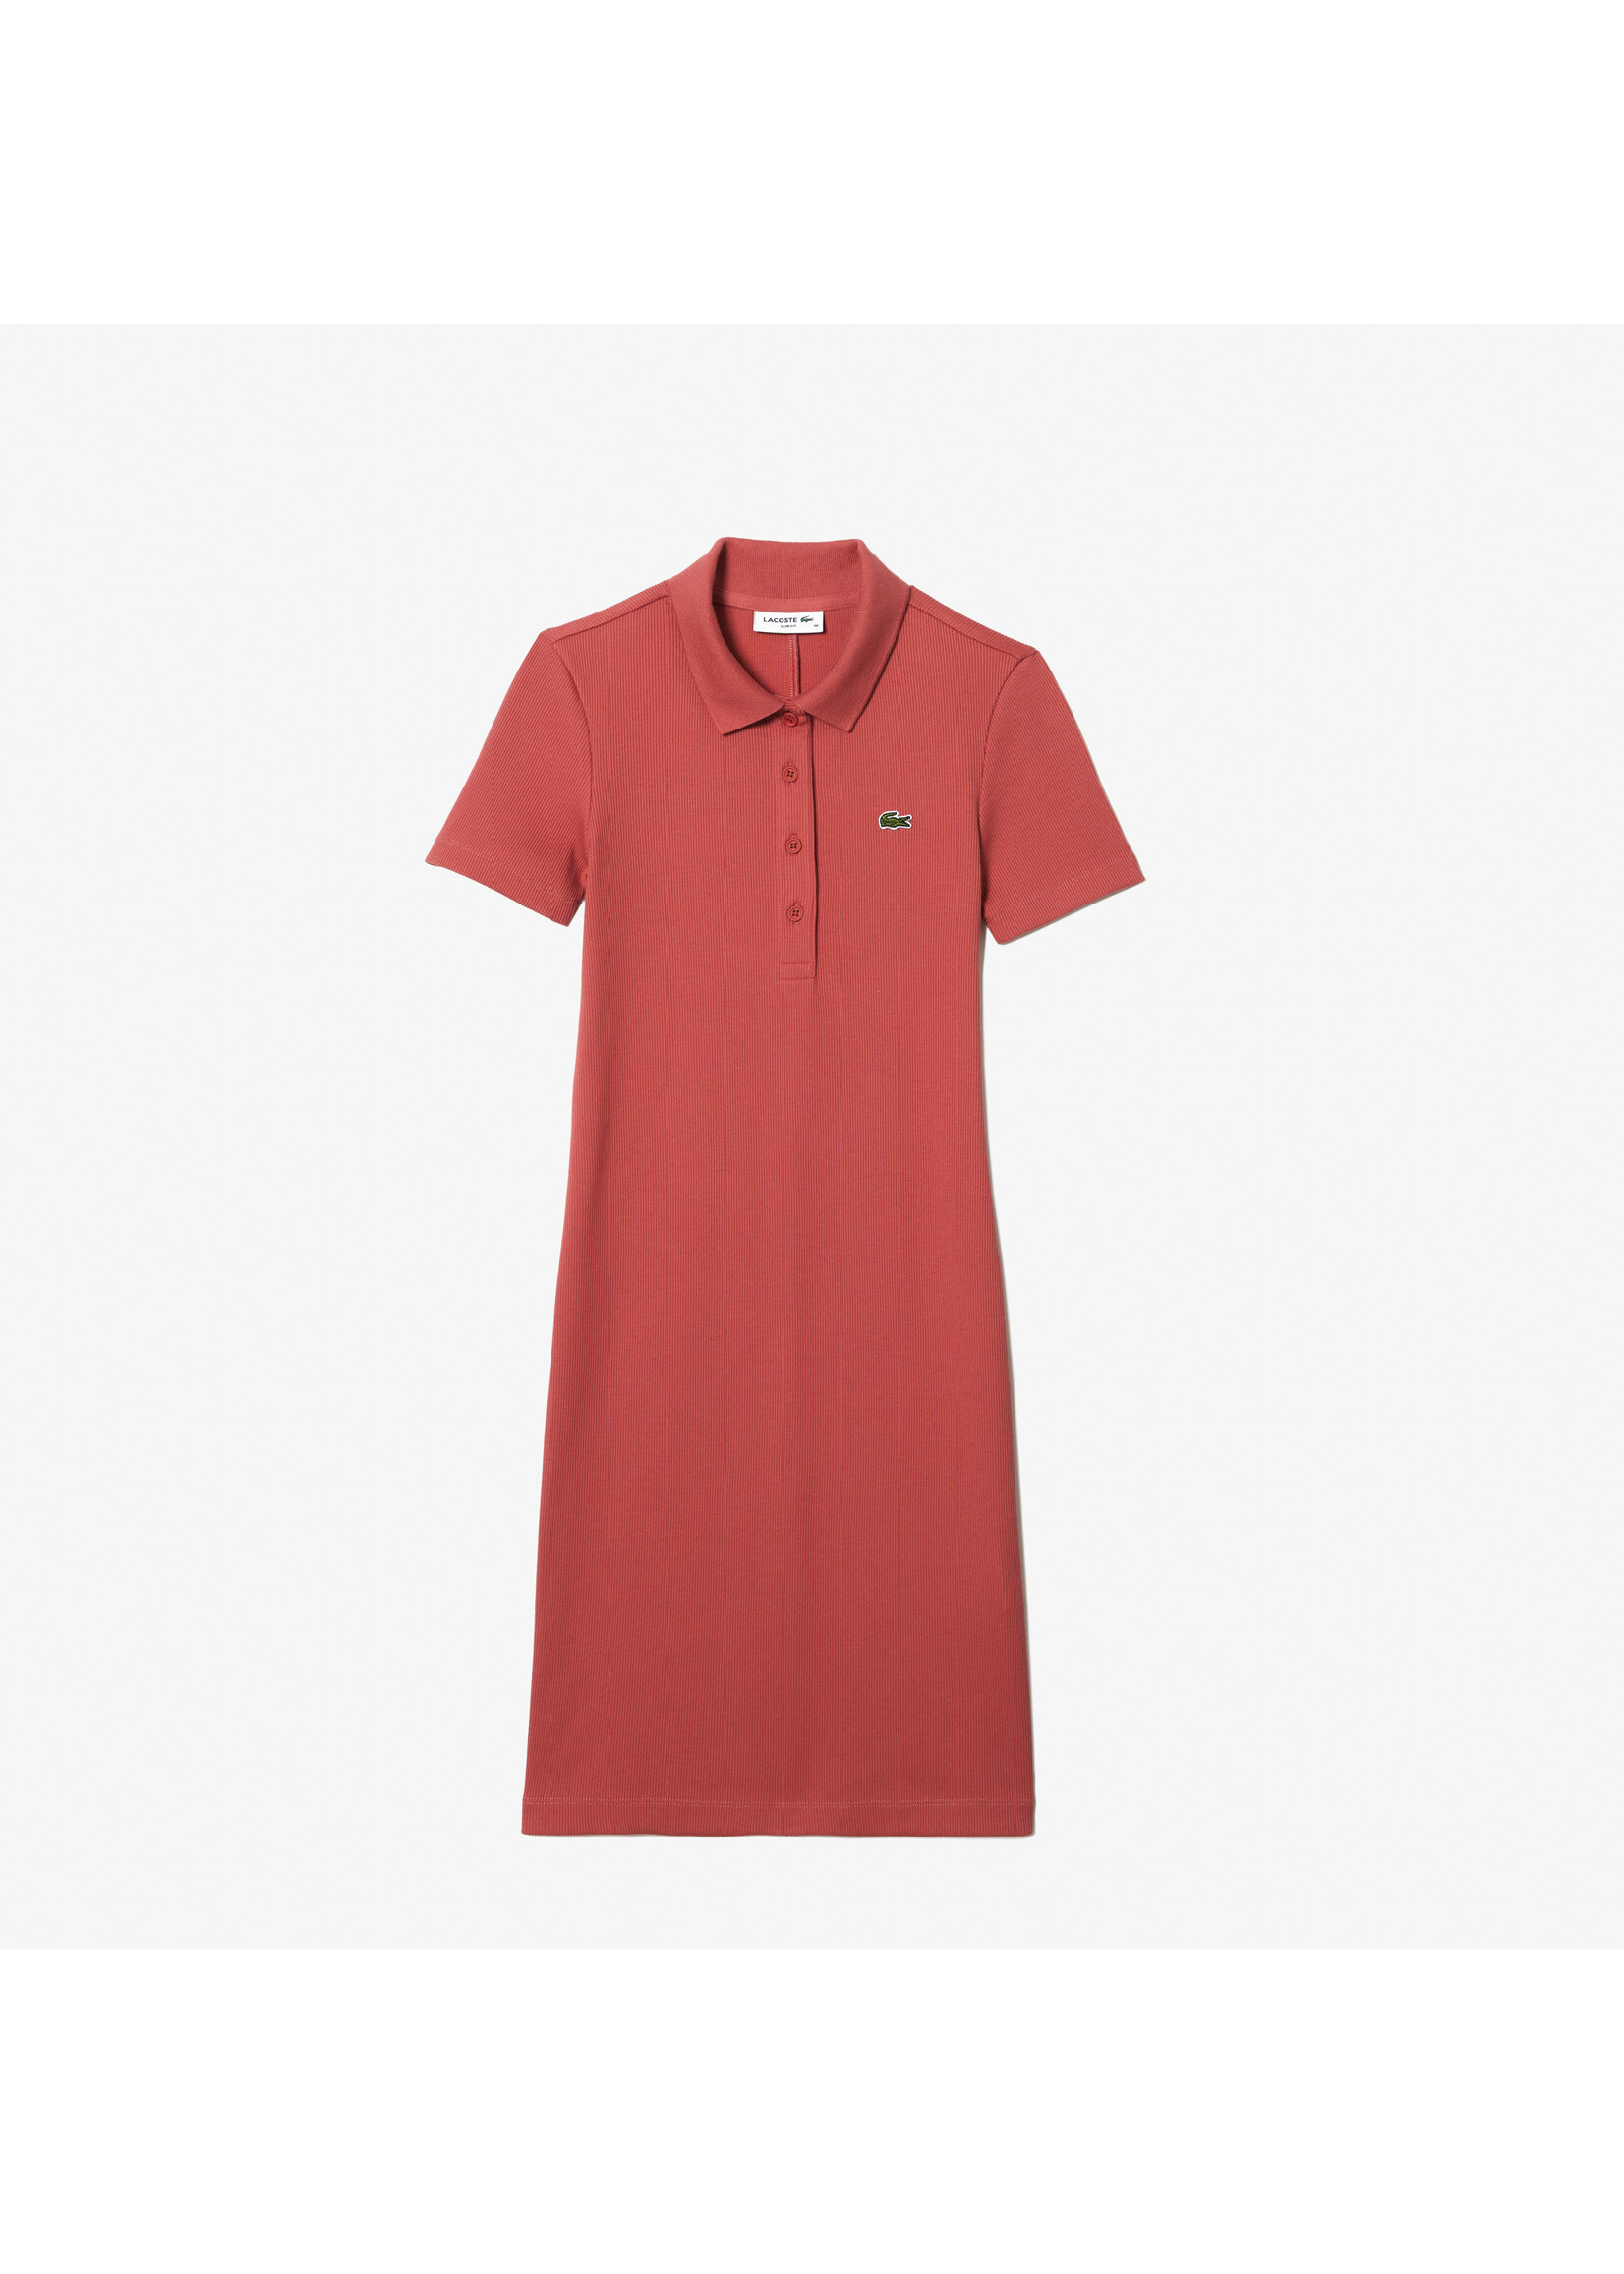 LACOSTE WOMEN'S SHORT SLEEVED SLIM FIT RIBBED COTTON DRESS